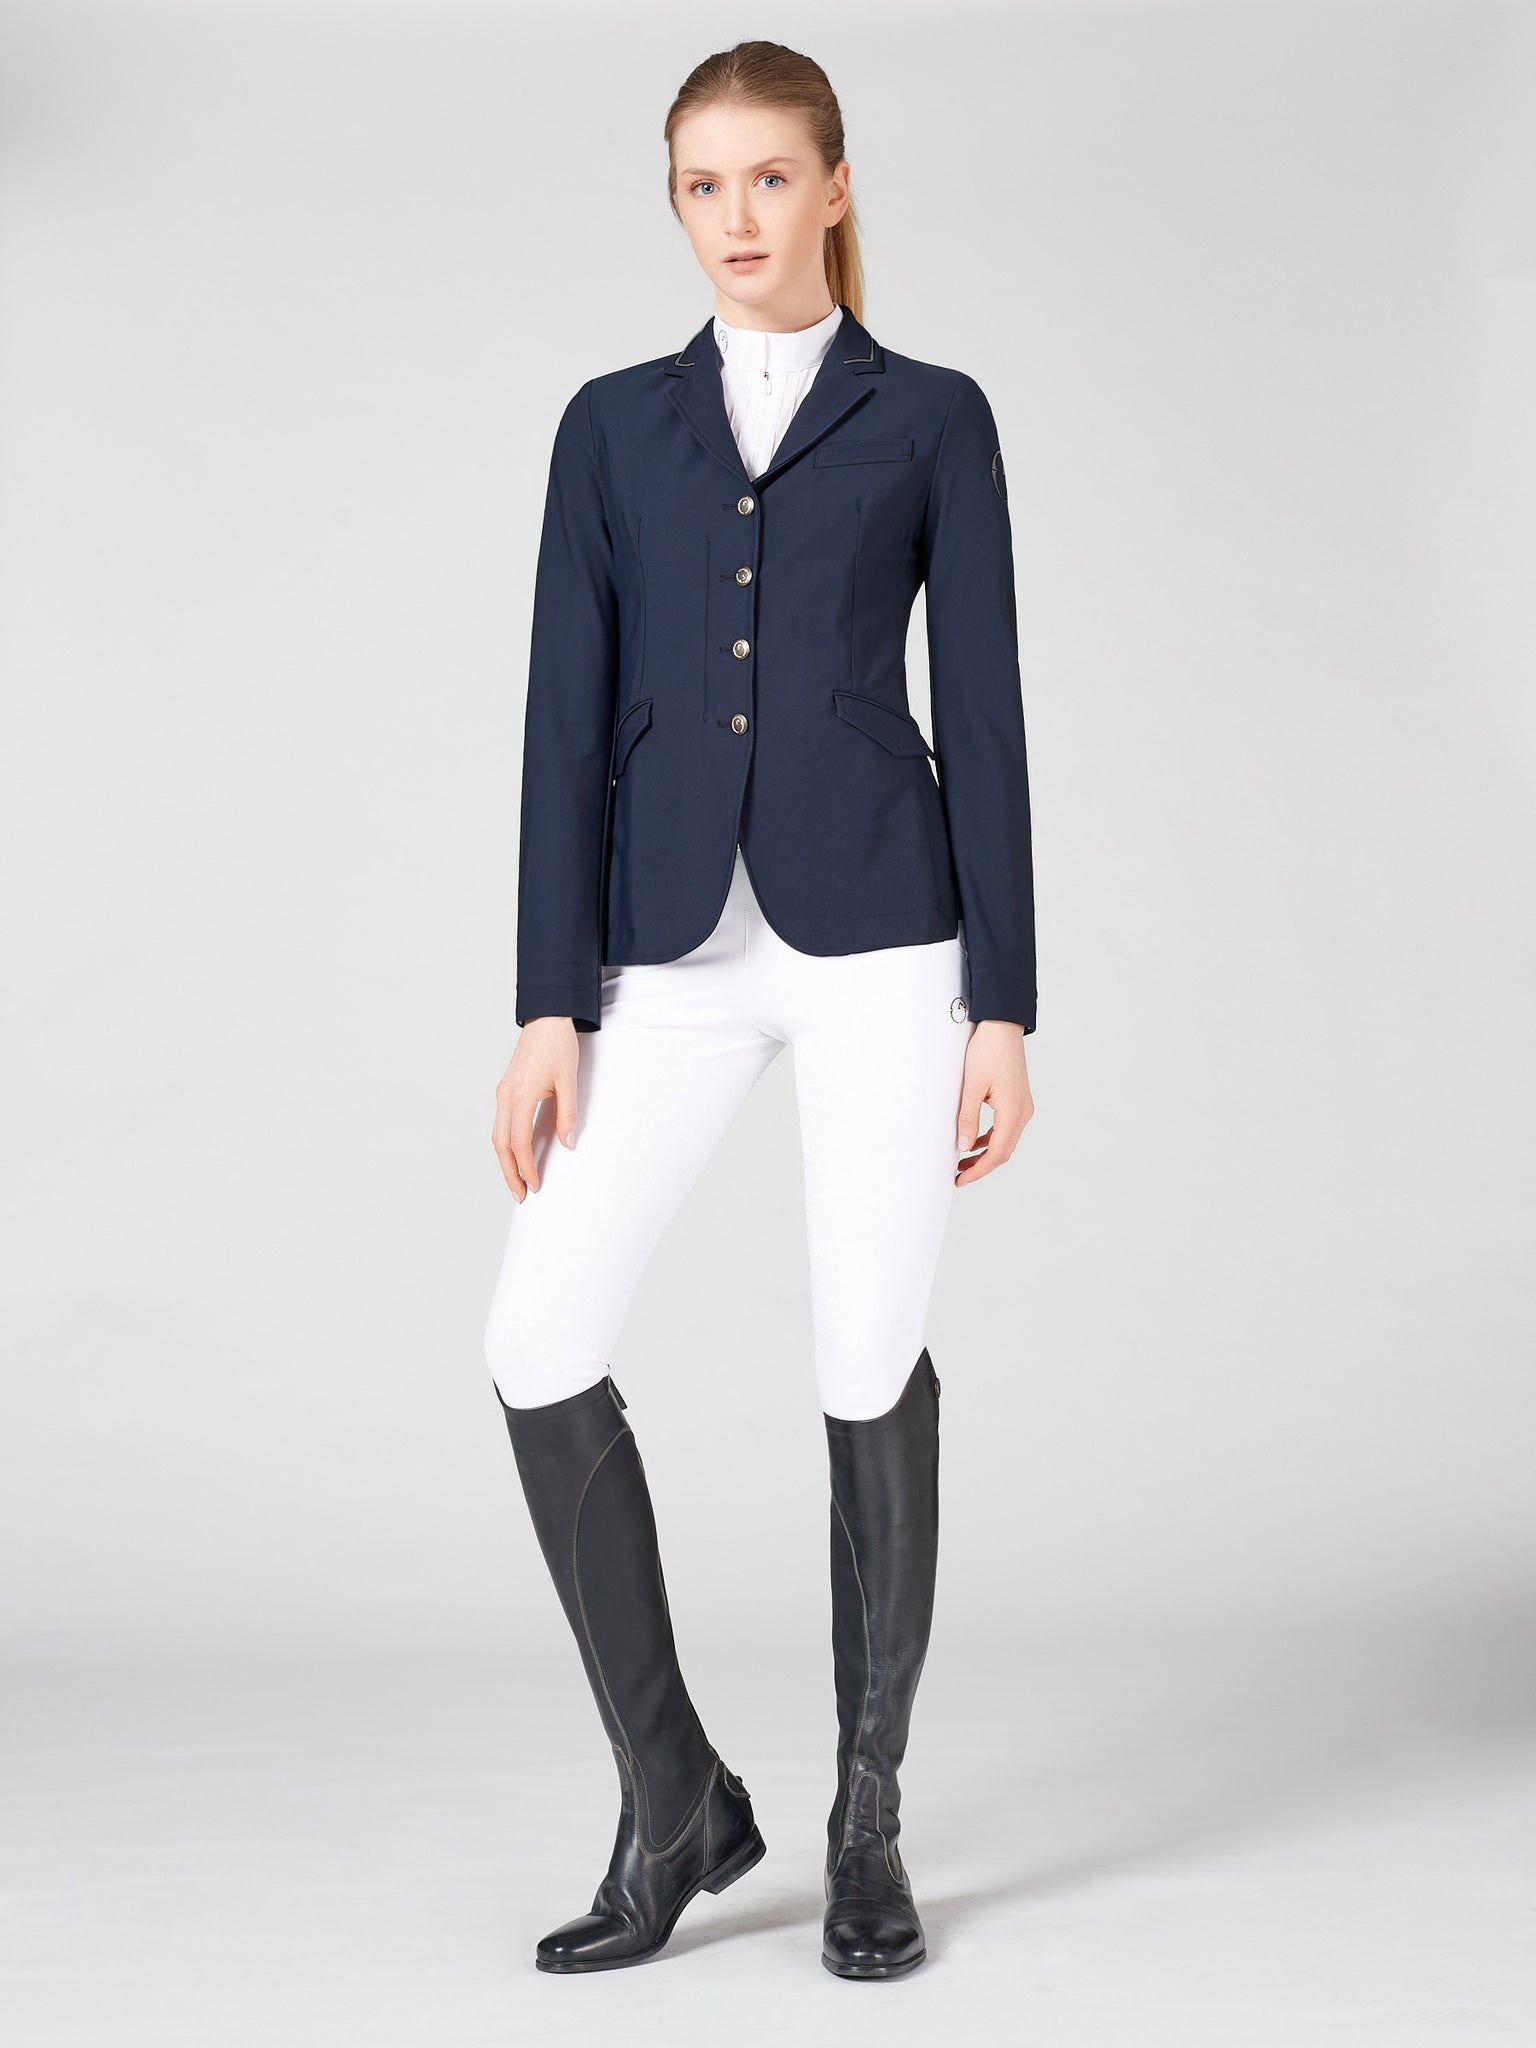 The Vestrum Canberra Navy competition jacket has a contrast detailing. This unlined  women’s competition jacket is made from a technical high performance knitted fabric that is very strong and makes it perfect for competitions. The fabric is also soft enough to guarantee freedom of movement for every body shape whilst. Riding. This extremely flattering cut makes this a popular choice for elegance and performance.